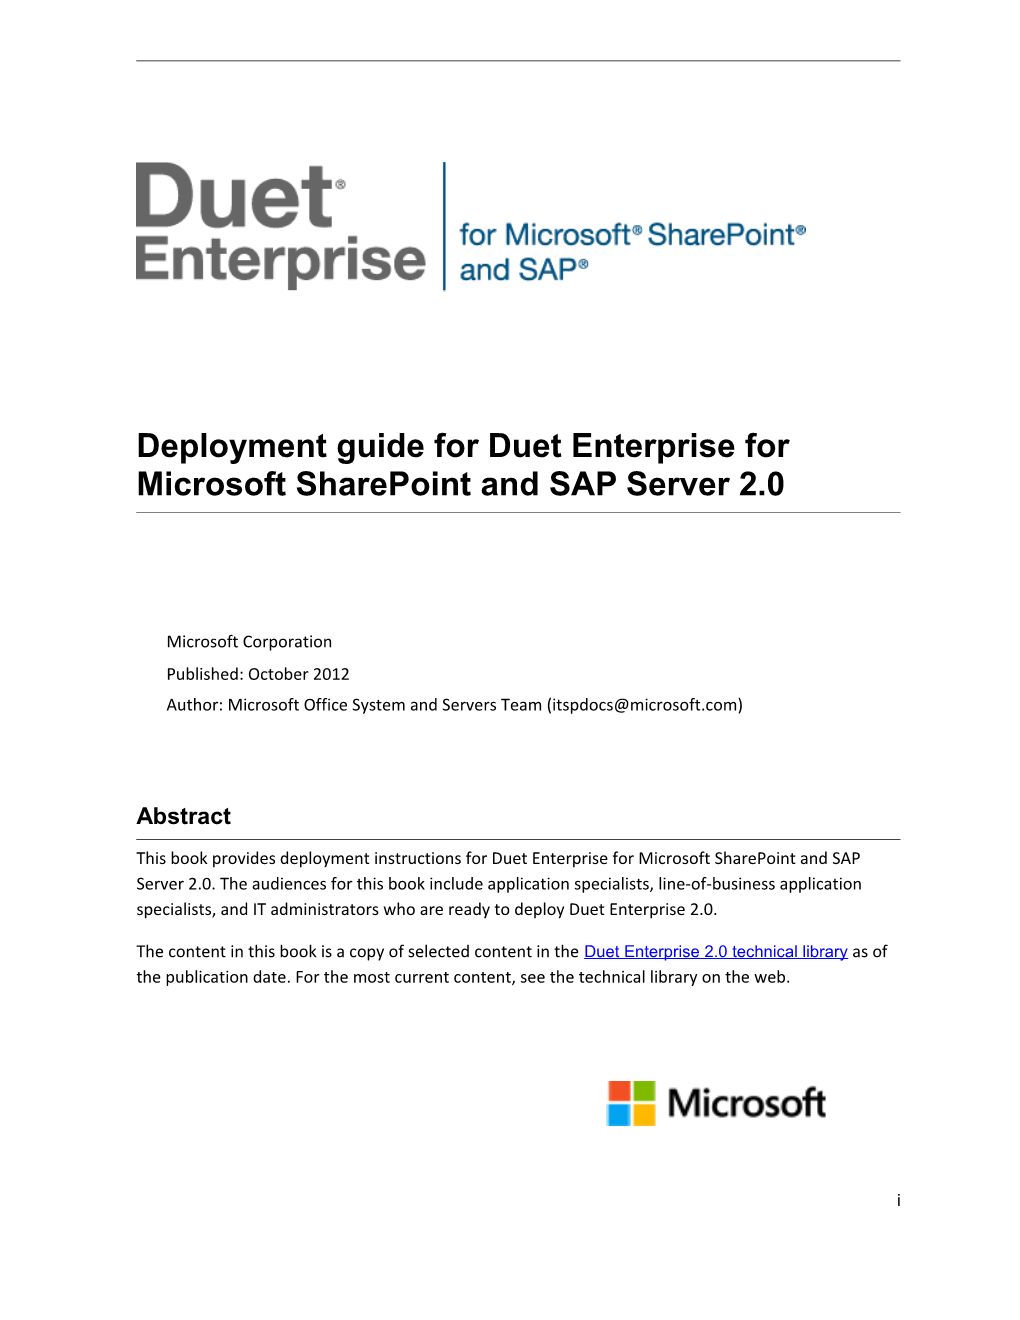 Deployment Guide for Duet Enterprise for Microsoft Sharepoint and SAP Server 2.0